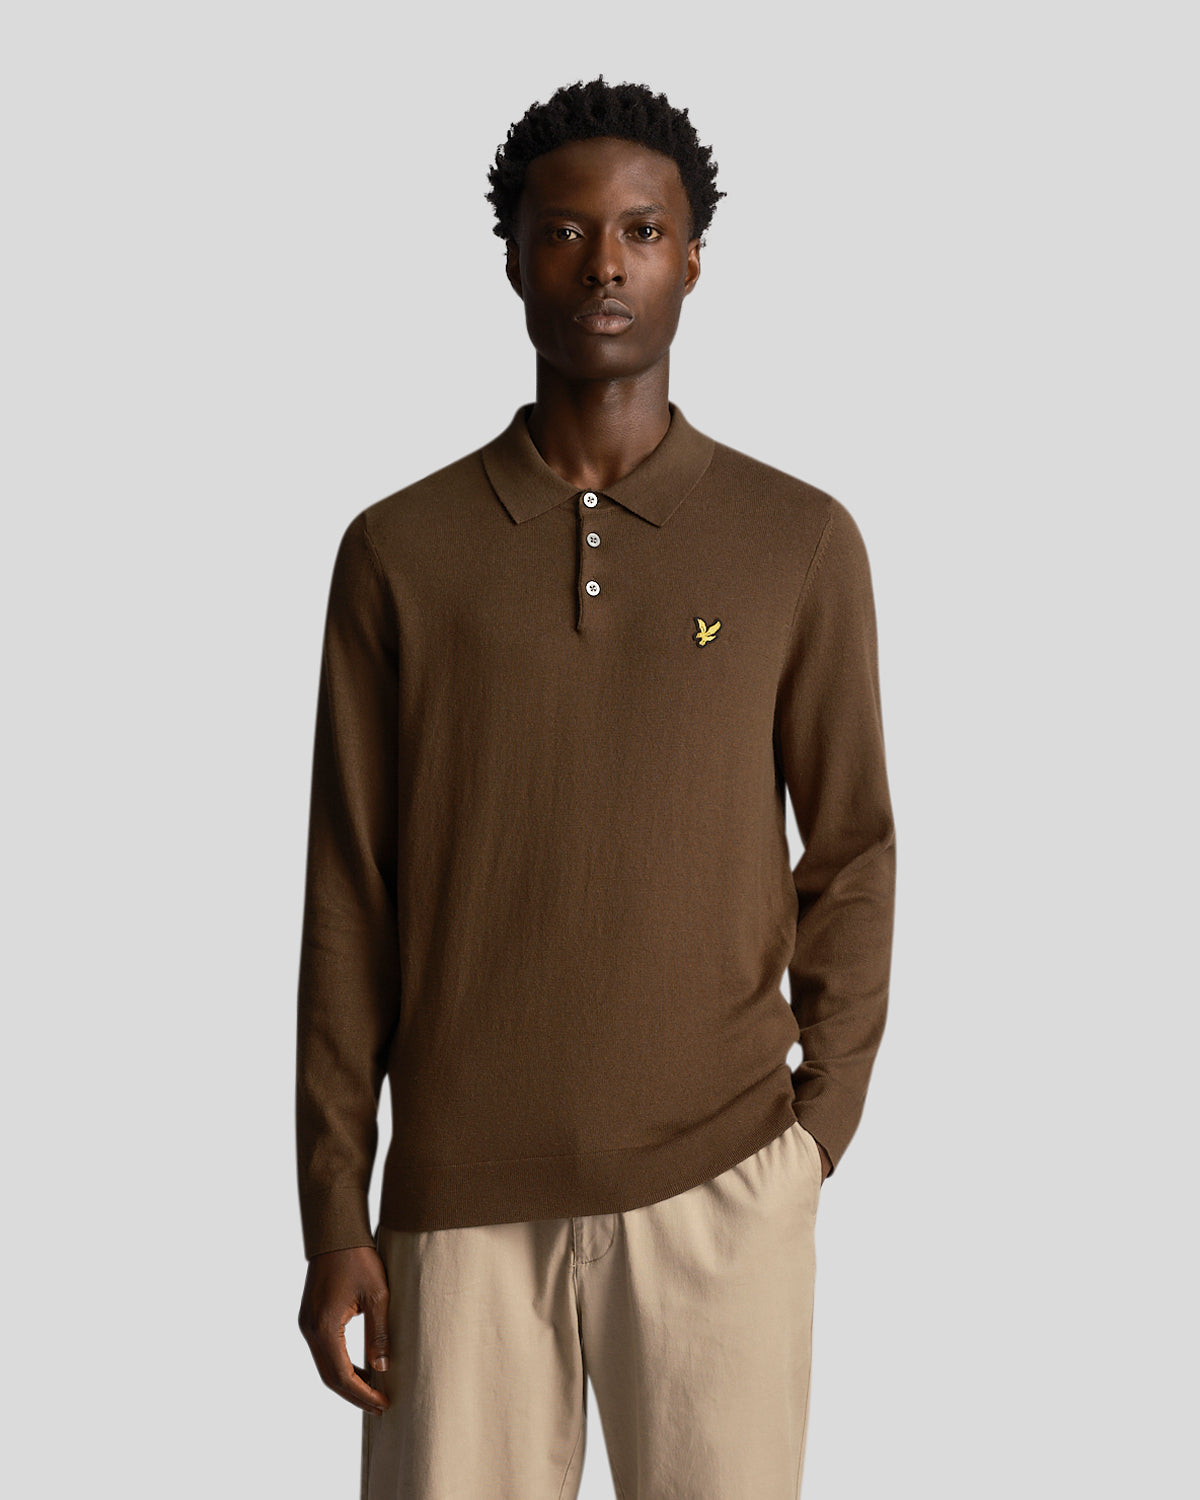 Lyle & Scott Mens Long Sleeve Knitted Polo Shirt in Olive - XXL